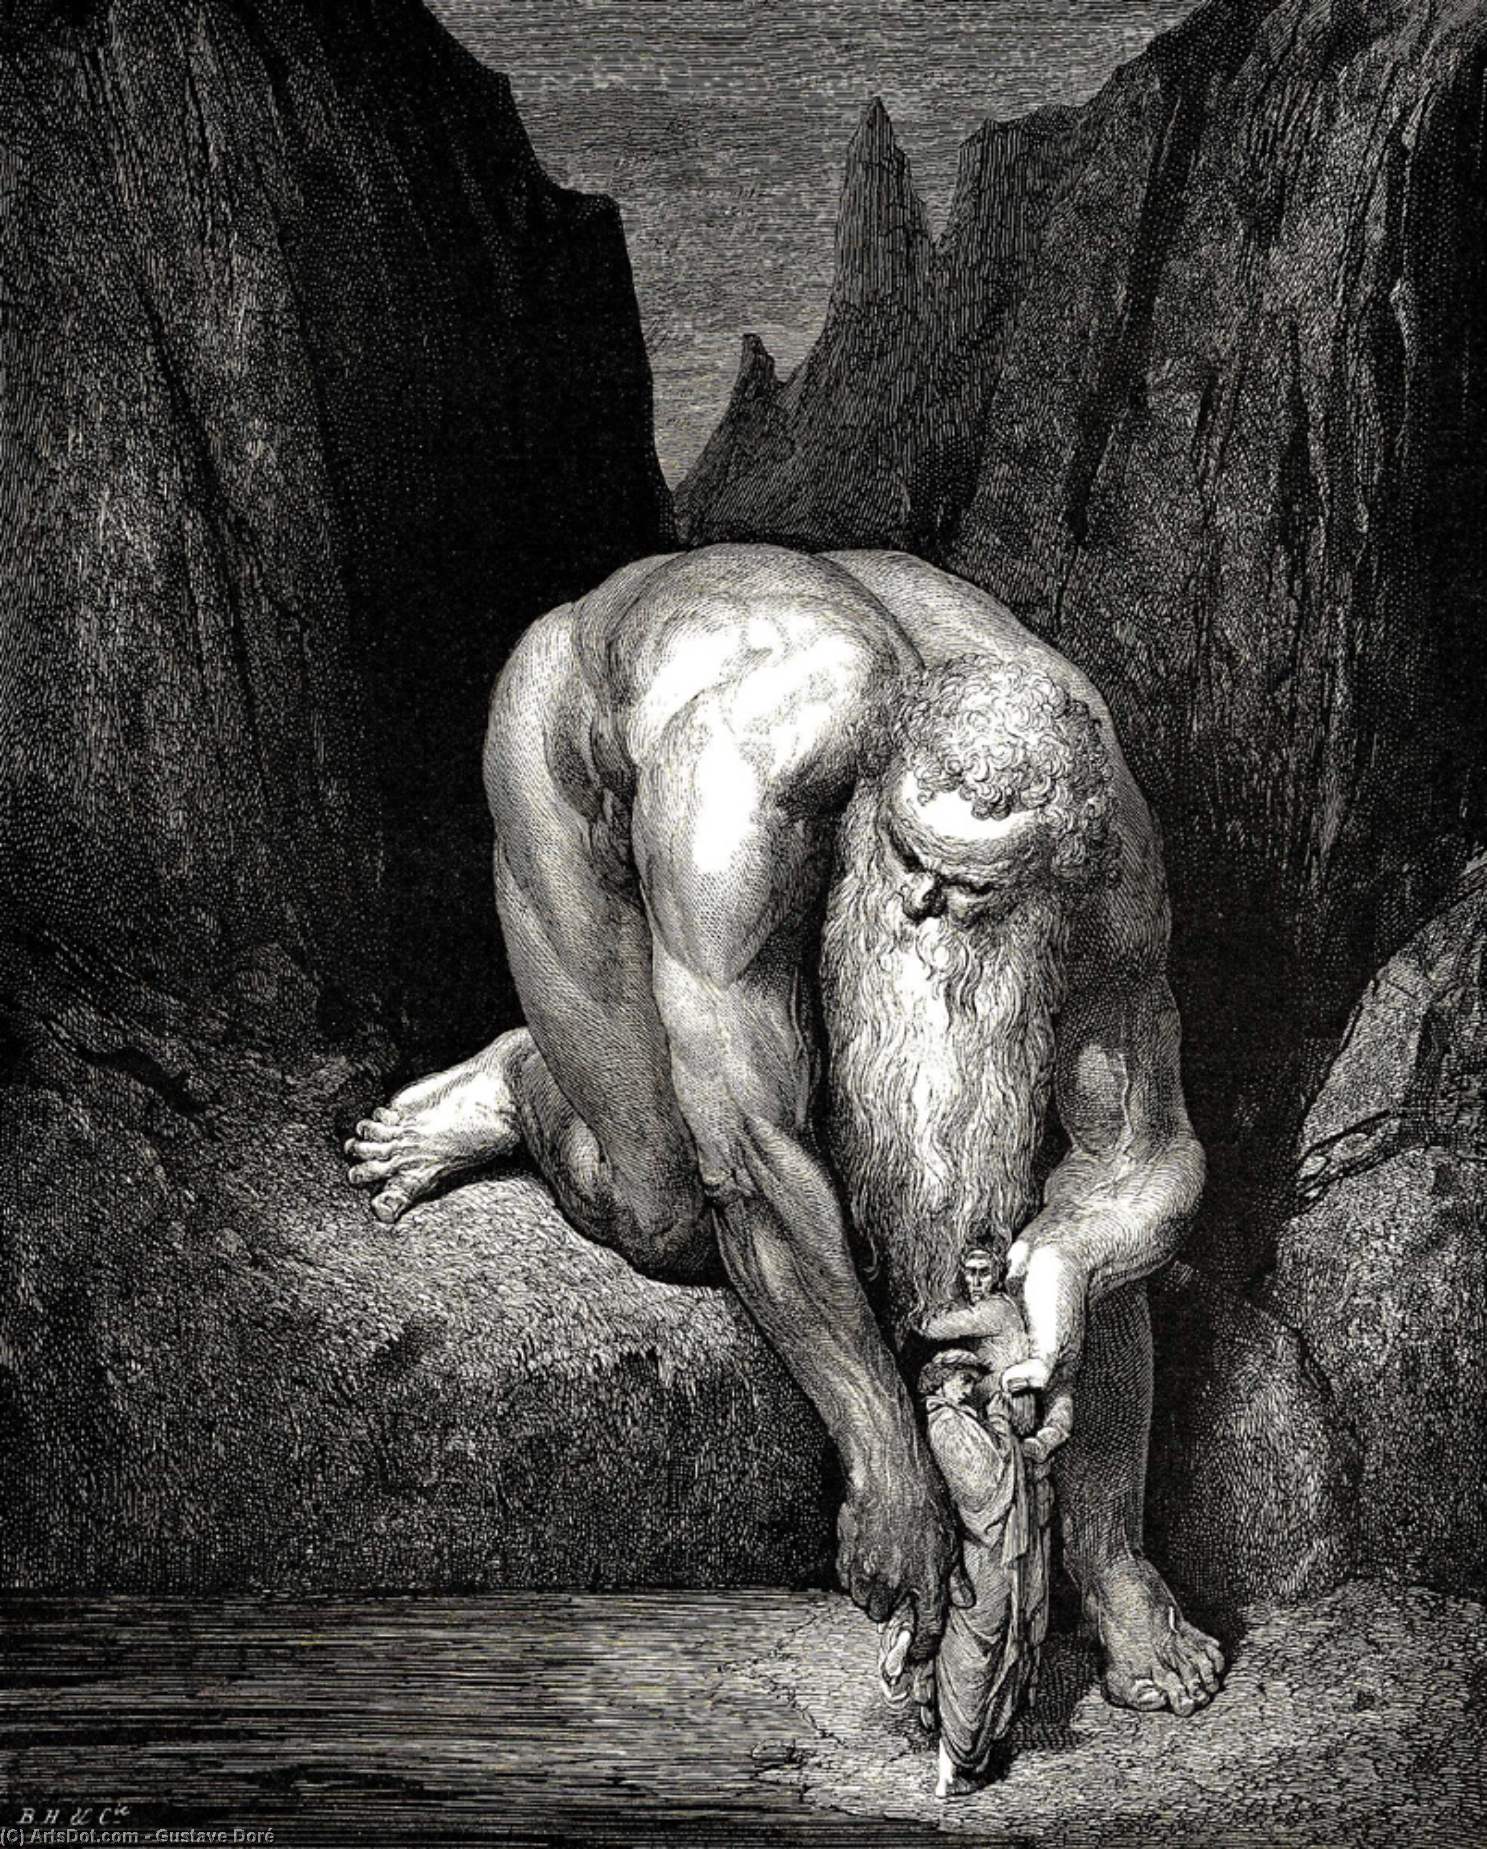 WikiOO.org - Güzel Sanatlar Ansiklopedisi - Resim, Resimler Paul Gustave Doré - The Inferno, Canto 31, lines 133-135. Yet in th’ abyss, That Lucifer with Judas low ingulfs, Lightly he plac’d us;